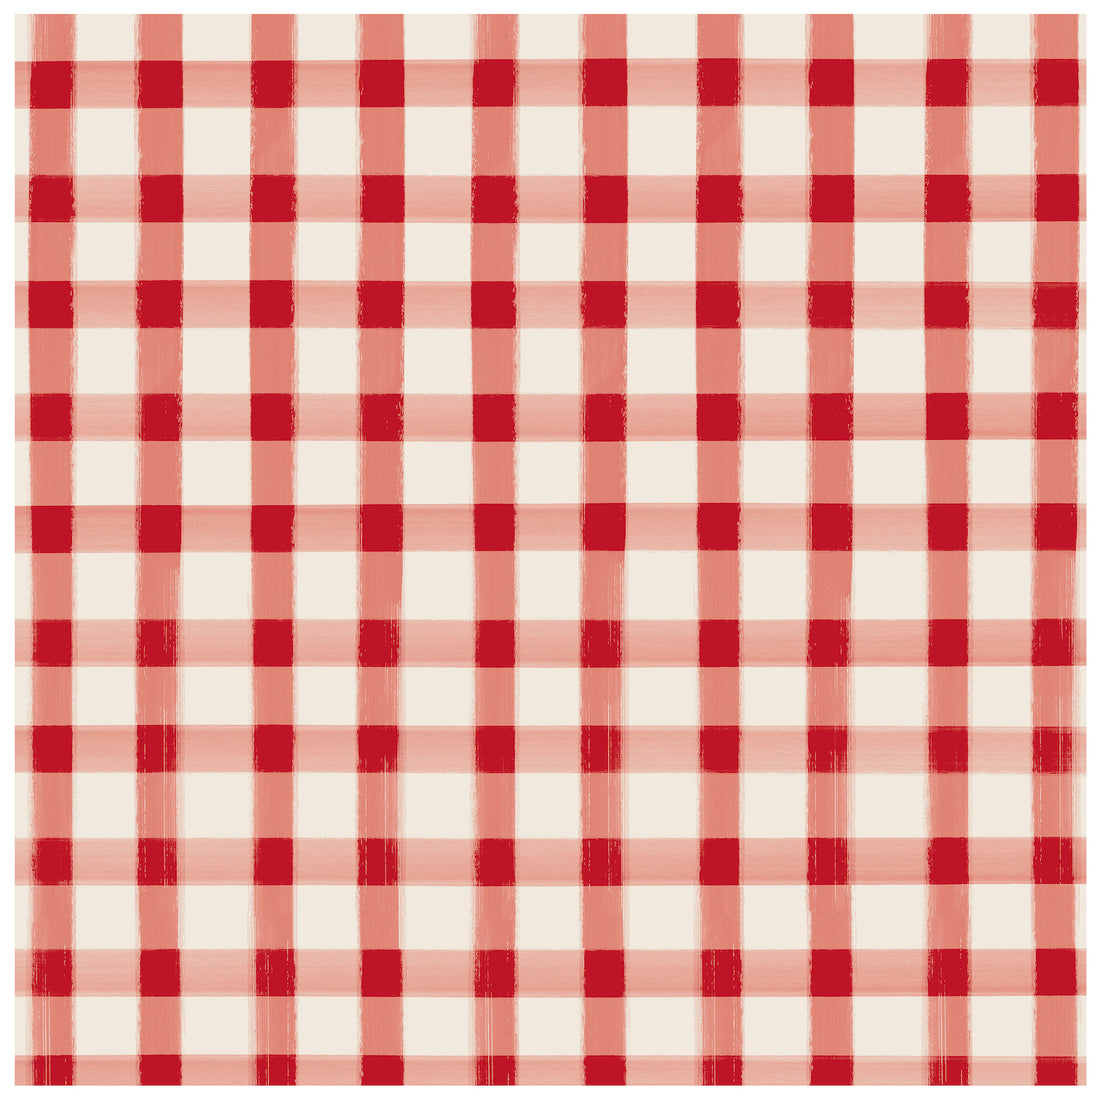 A square cocktail napkin featuring painted gingham grid check pattern made of light red lines intersecting at red squares, on a white background.